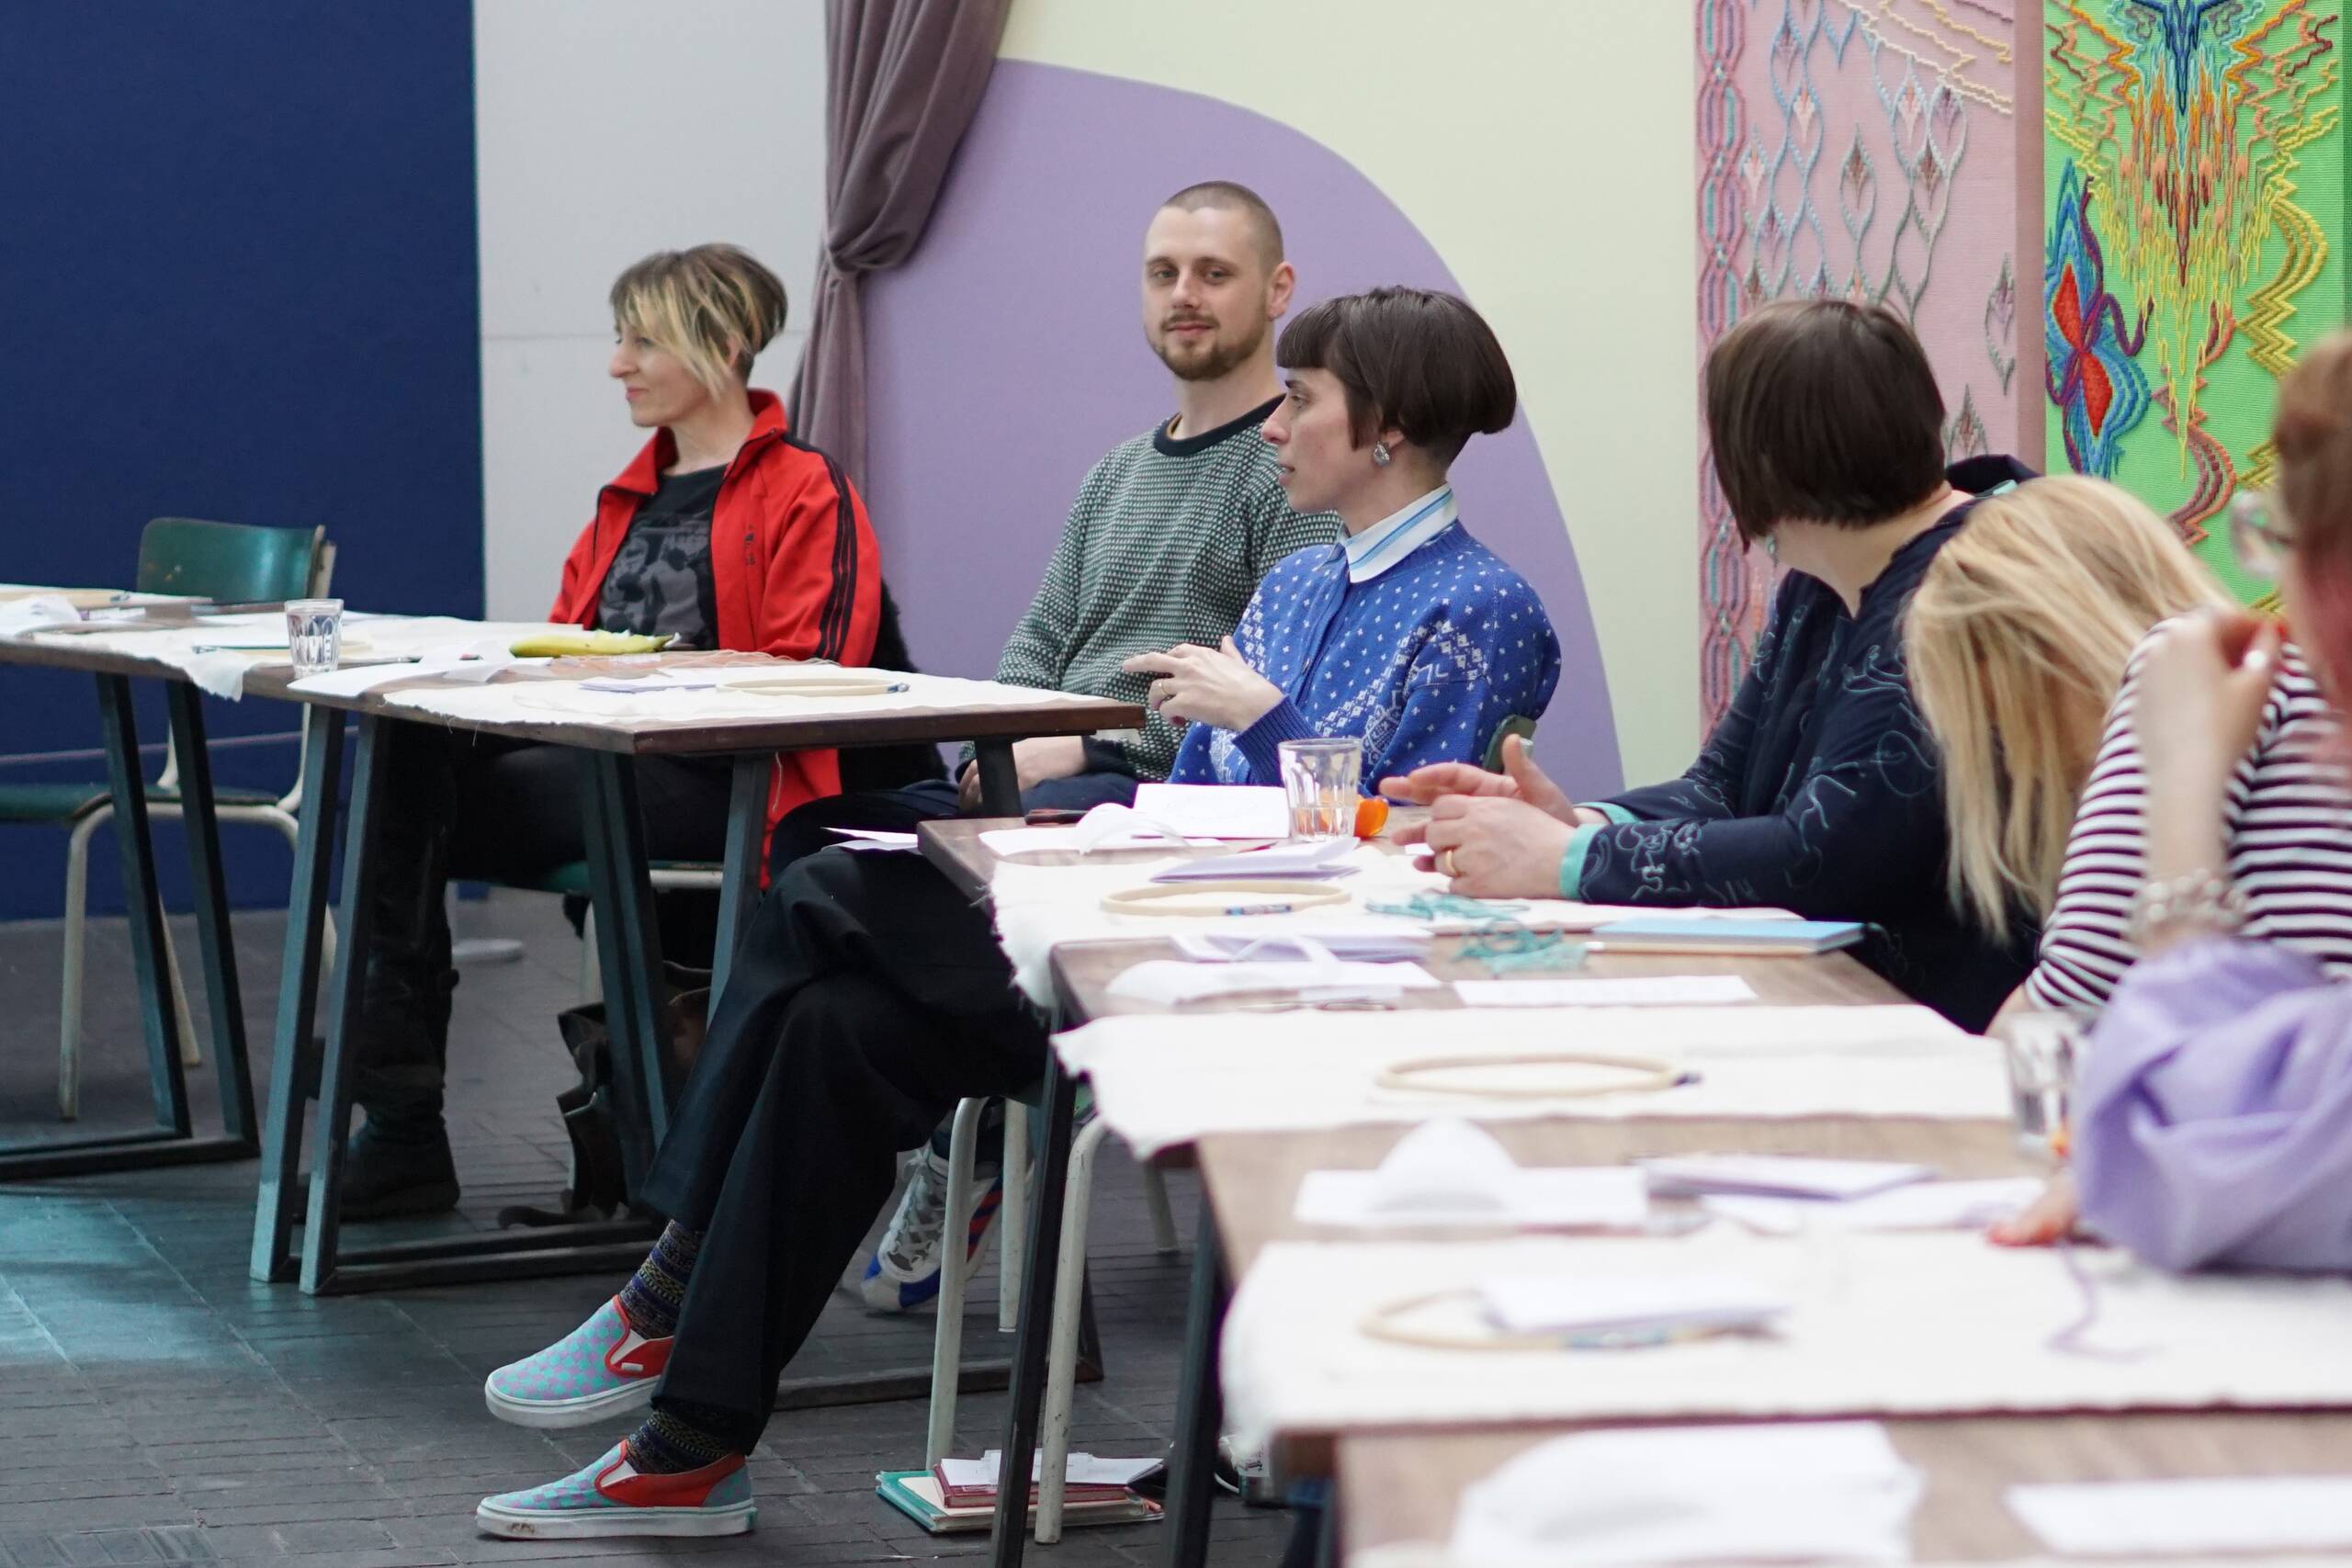 COSMOS, Embroidery workshop with readings held at Jerwood Arts, London UK, 2022